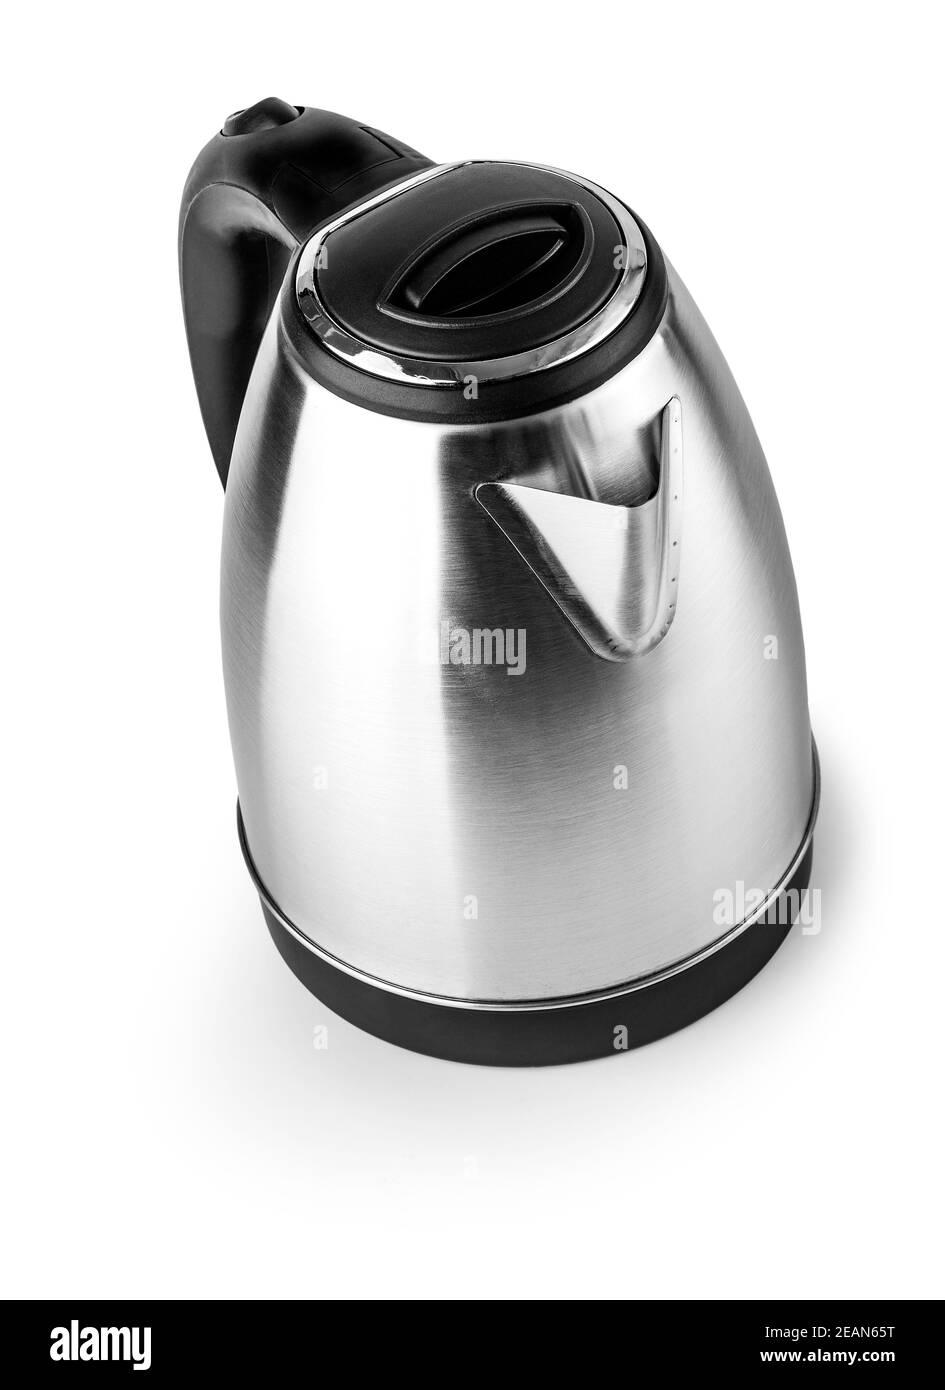 Stainless Steel Electric Kettle on the white background Stock Photo